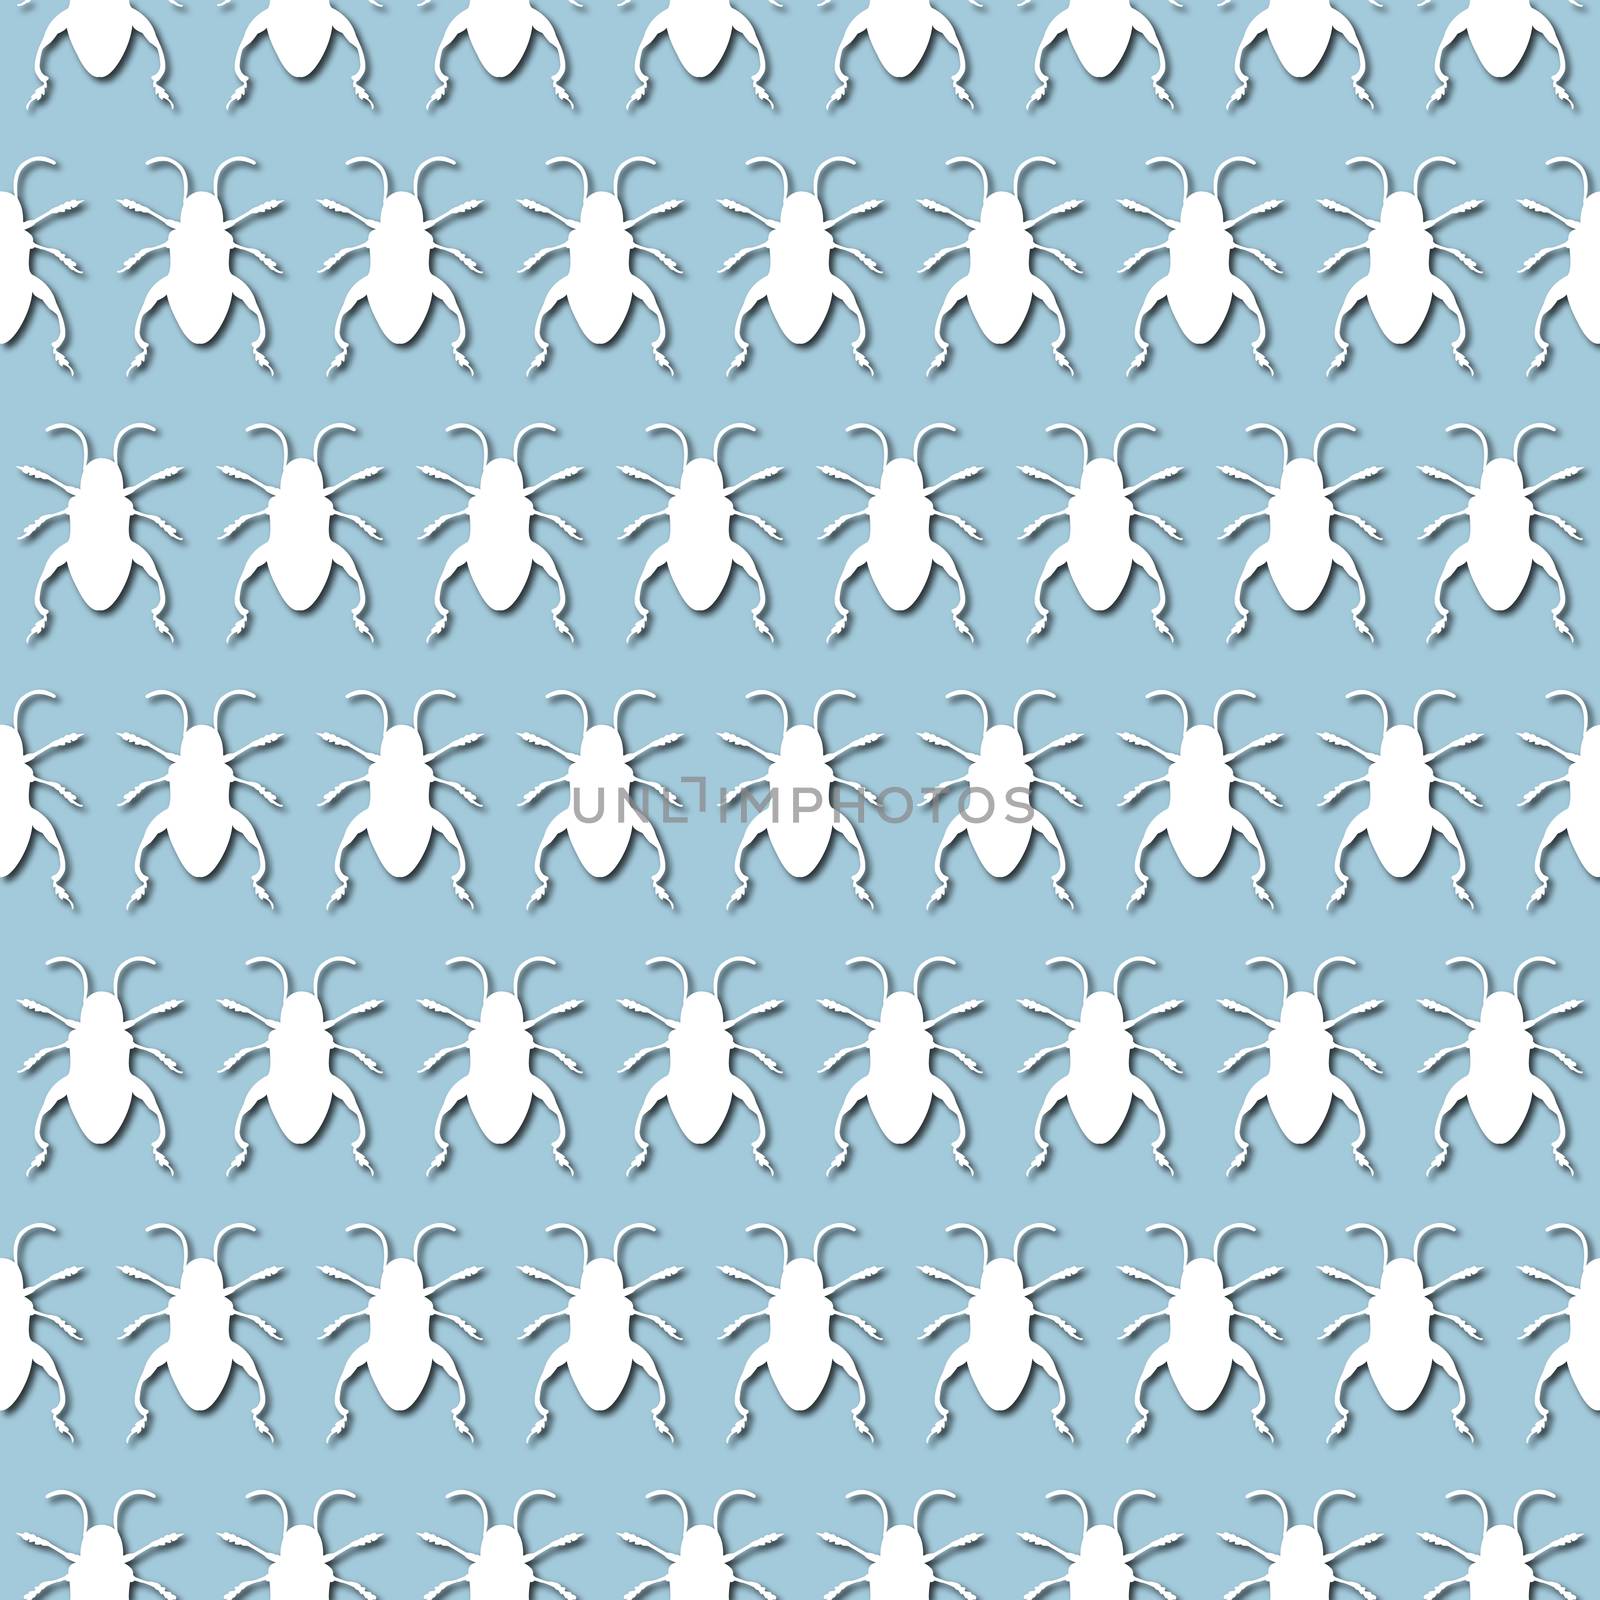 White bug, beetle silhouette on pale blue background, seamless pattern. Paper cut style by Pashchenko